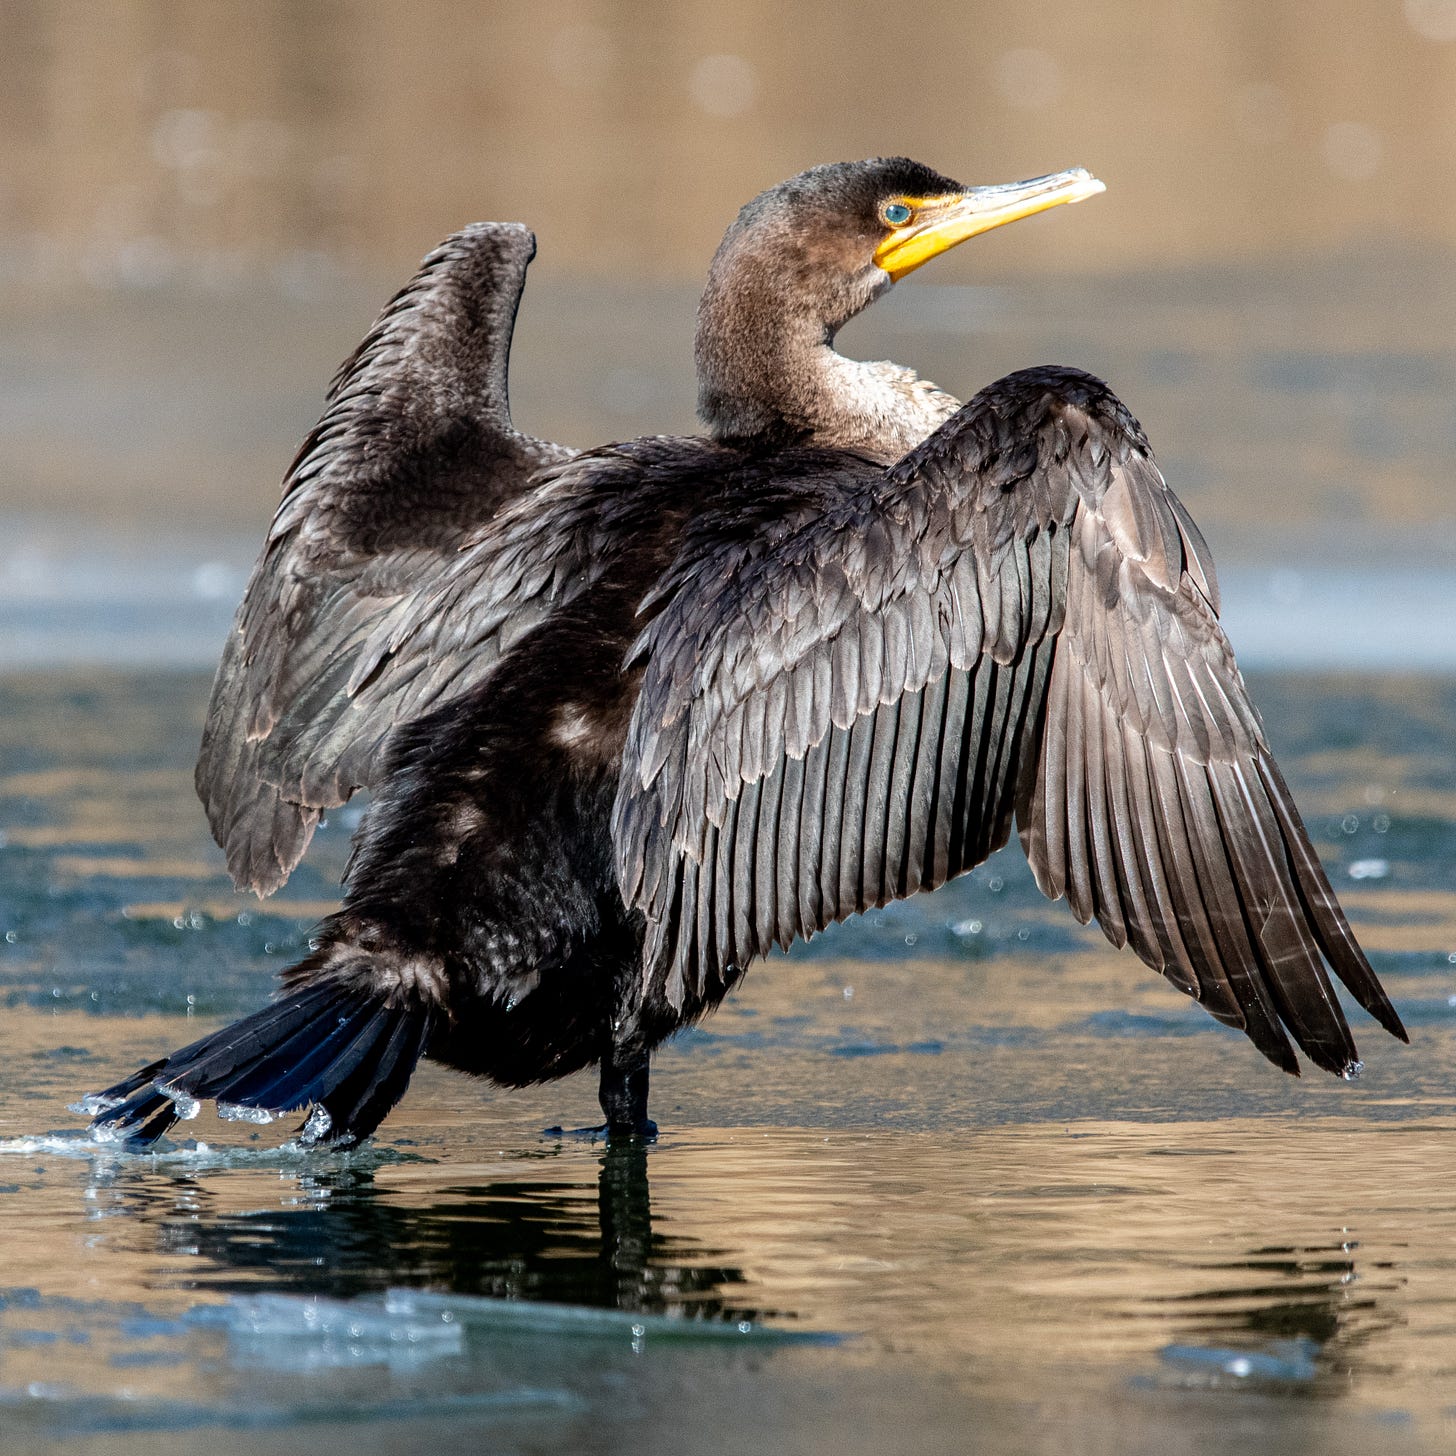 Cormorant standing on ice, wings spread in a W shape, looks back over its shoulder at viewer